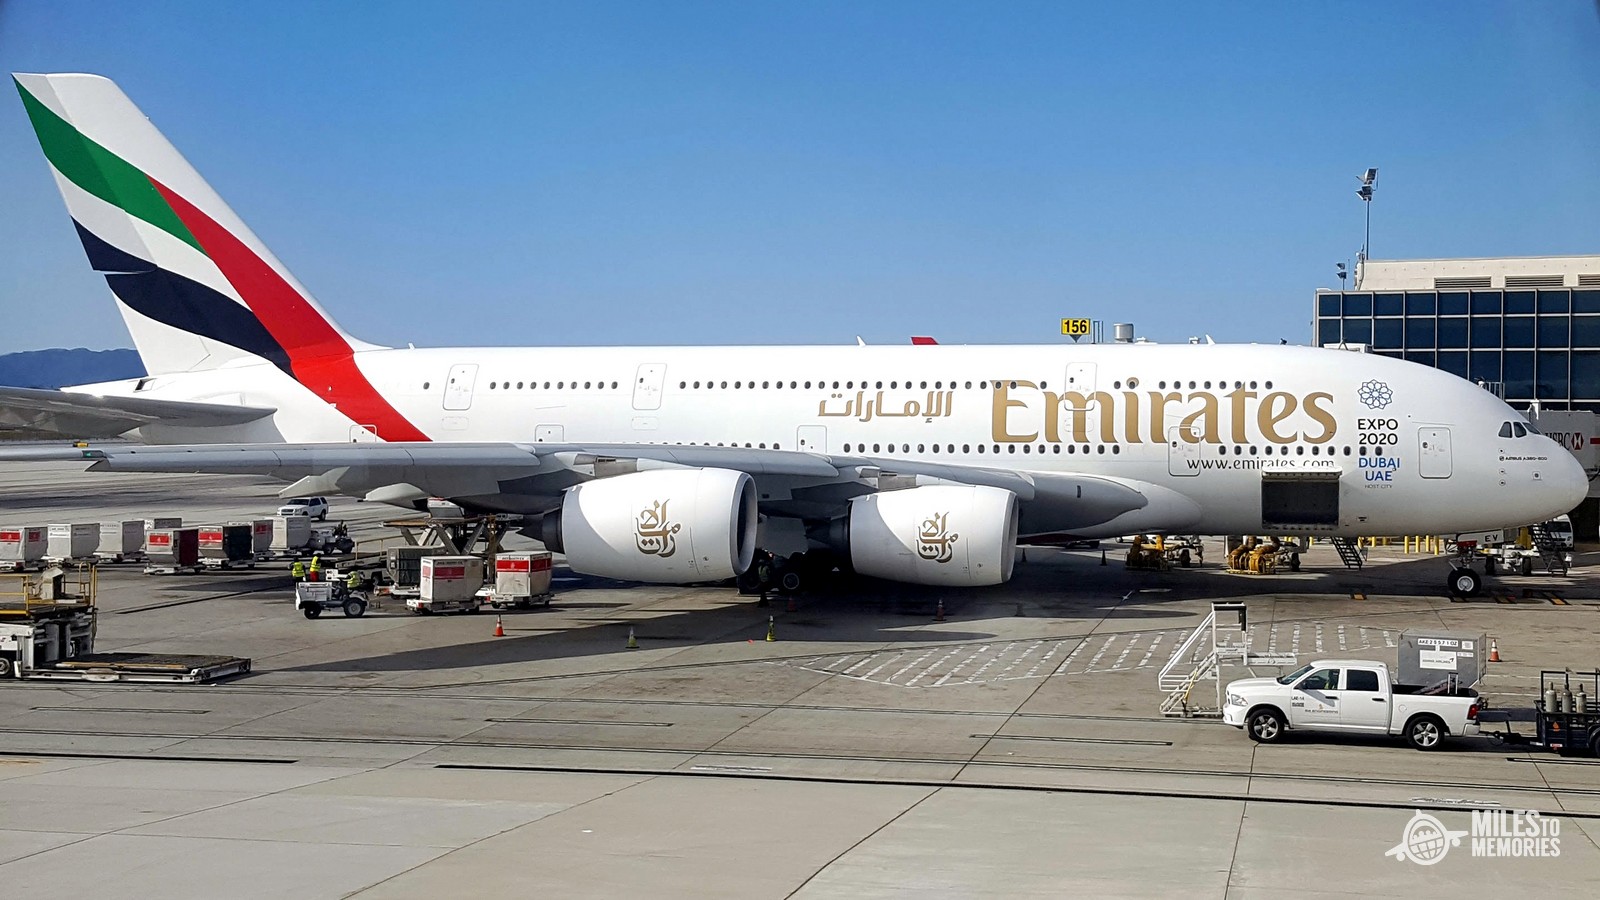 Share points with Emirates